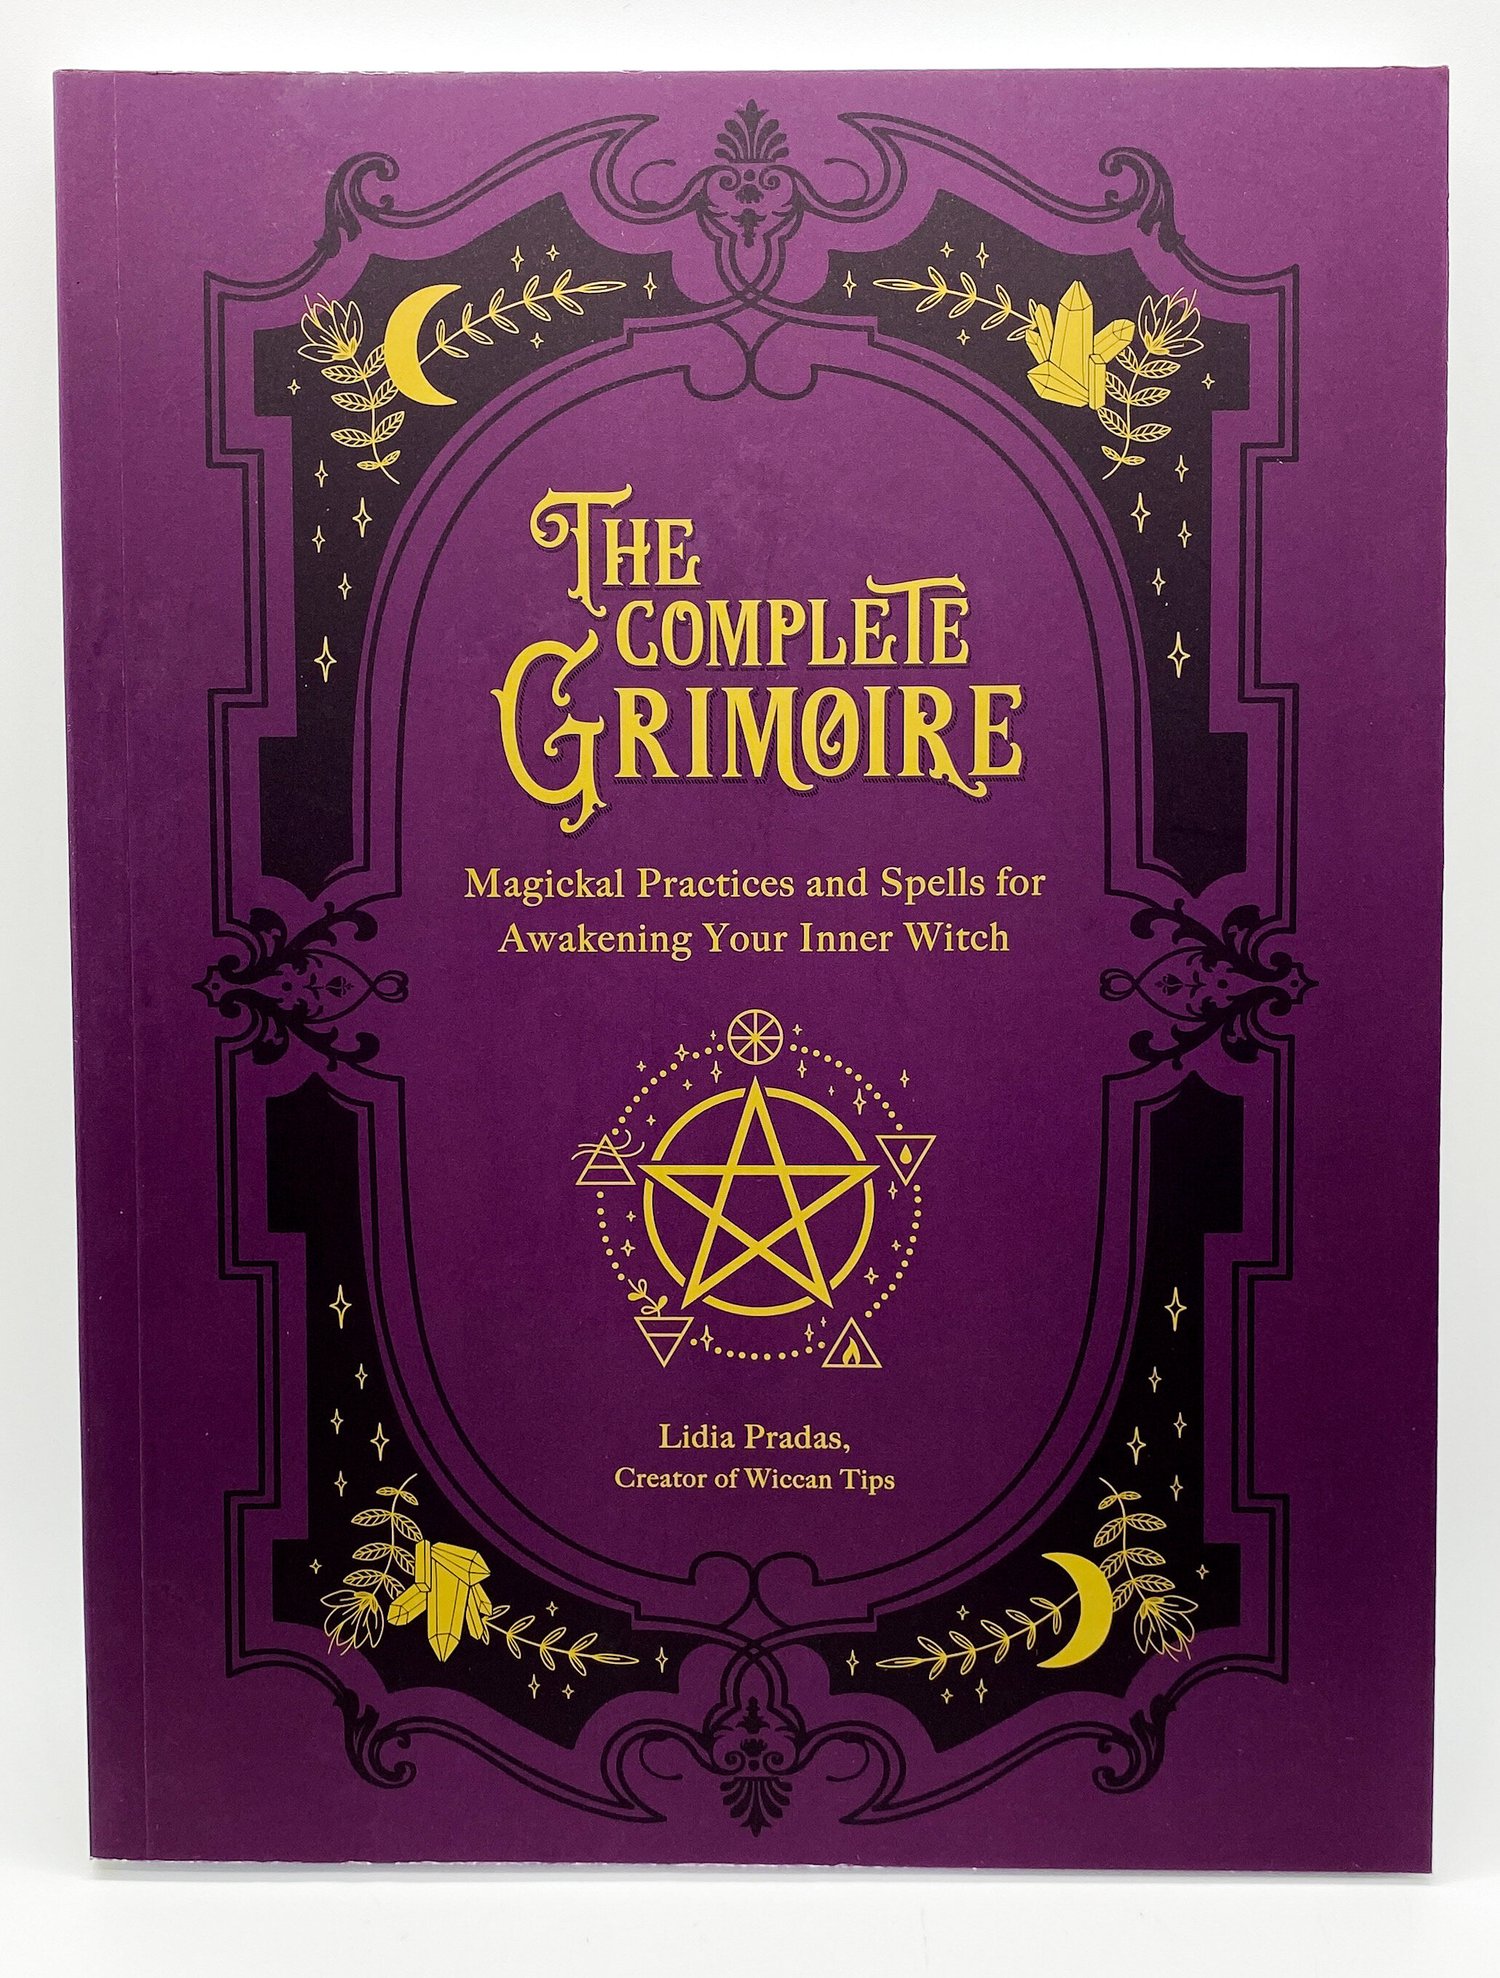 The Complete Grimoire by Lidia Pradas — Rest in Pieces